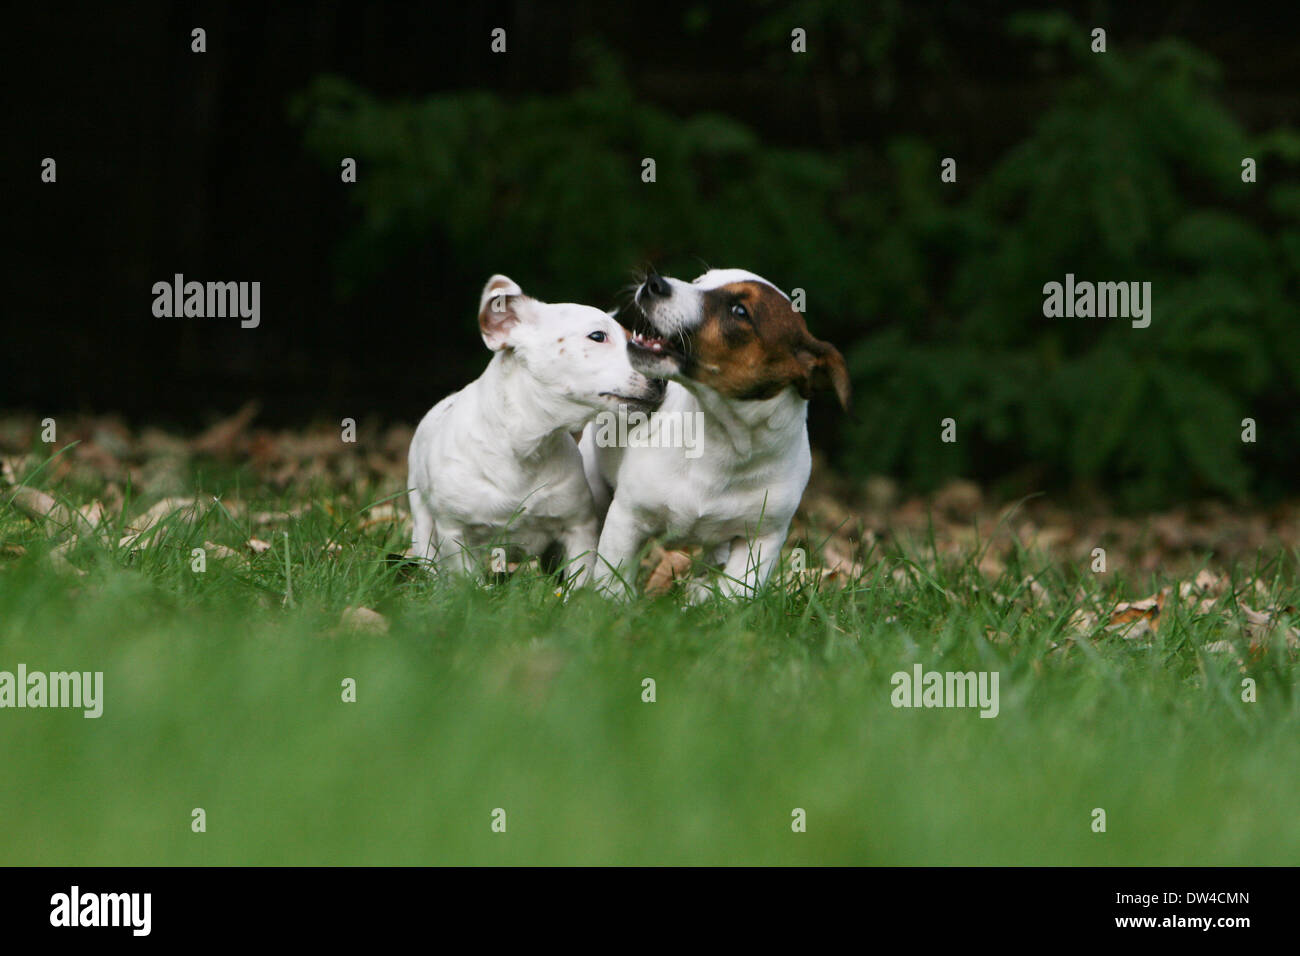 Dog Jack Russel Terrier  /  two puppies playing in a garden Stock Photo